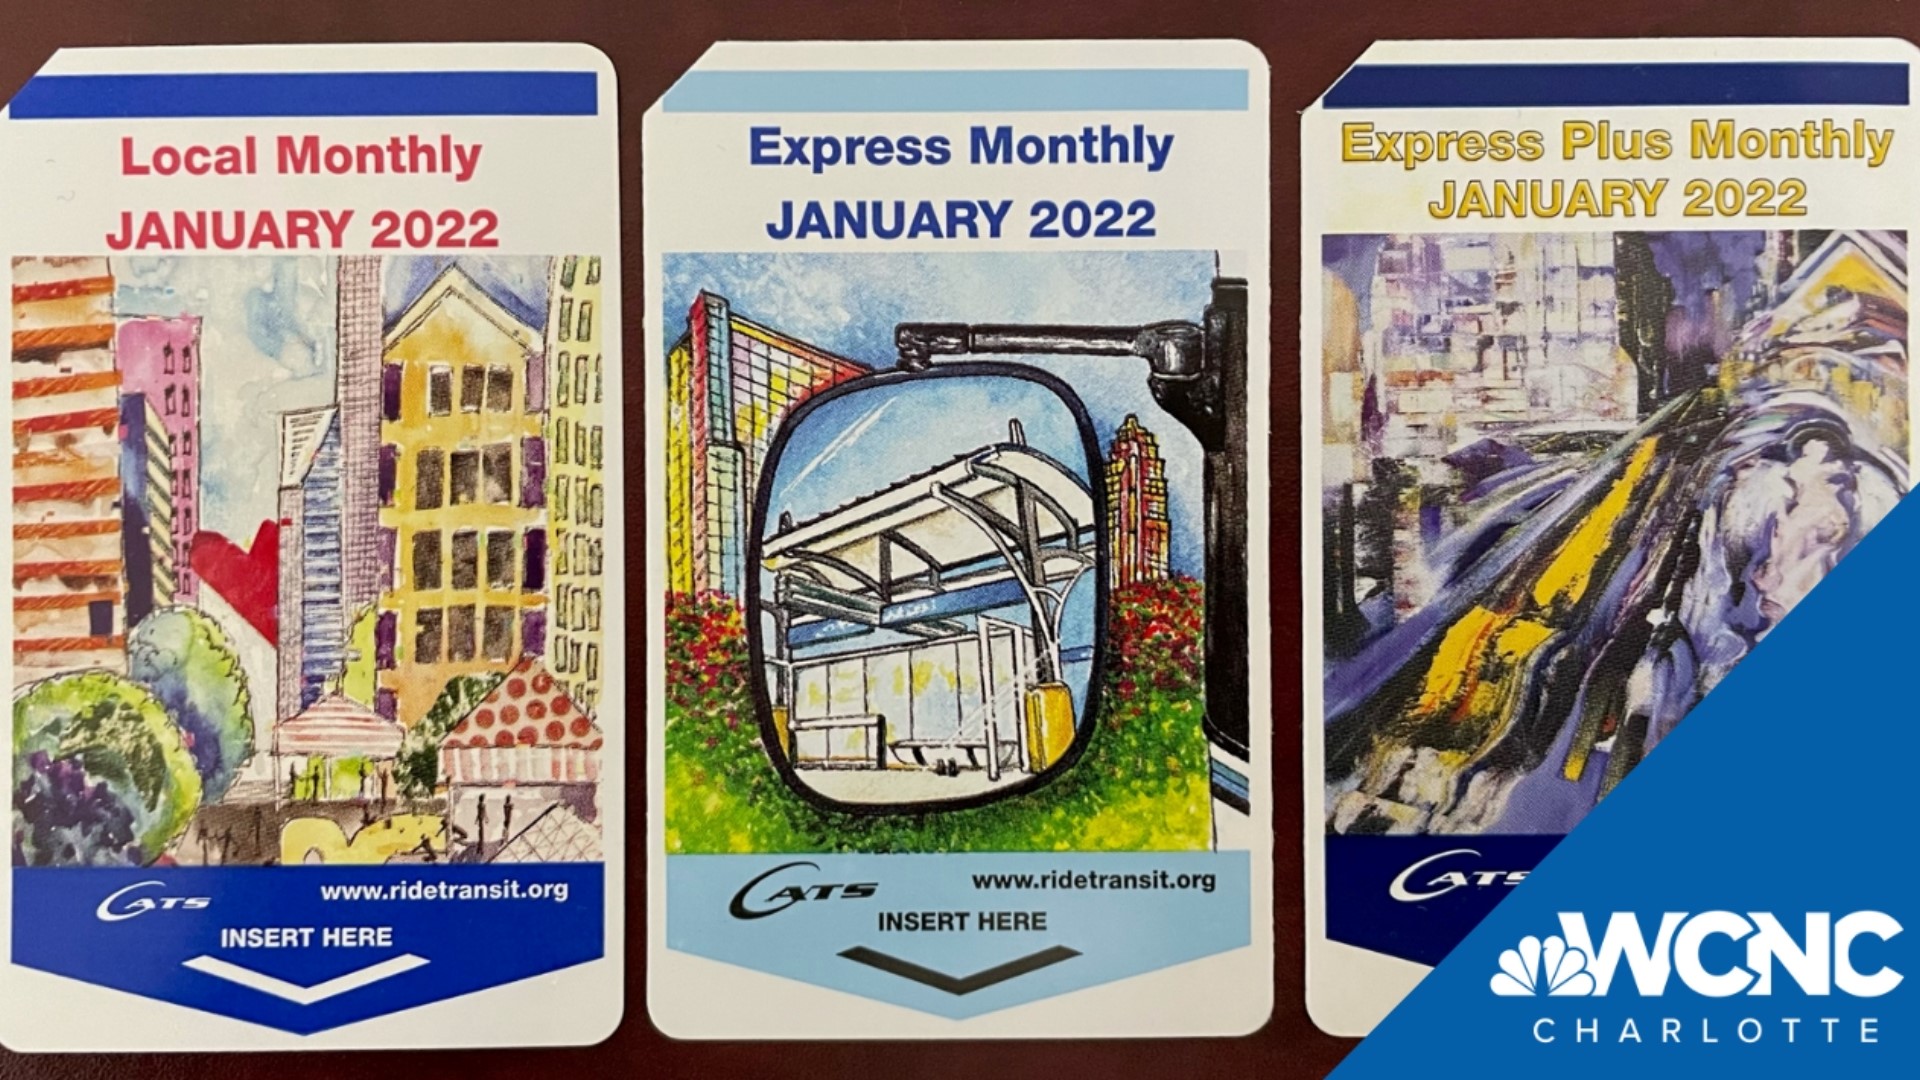 CATS said the three winners will be selected to have their artwork printed on Local, Express and Express Plus passes for the 2023 calendar year.